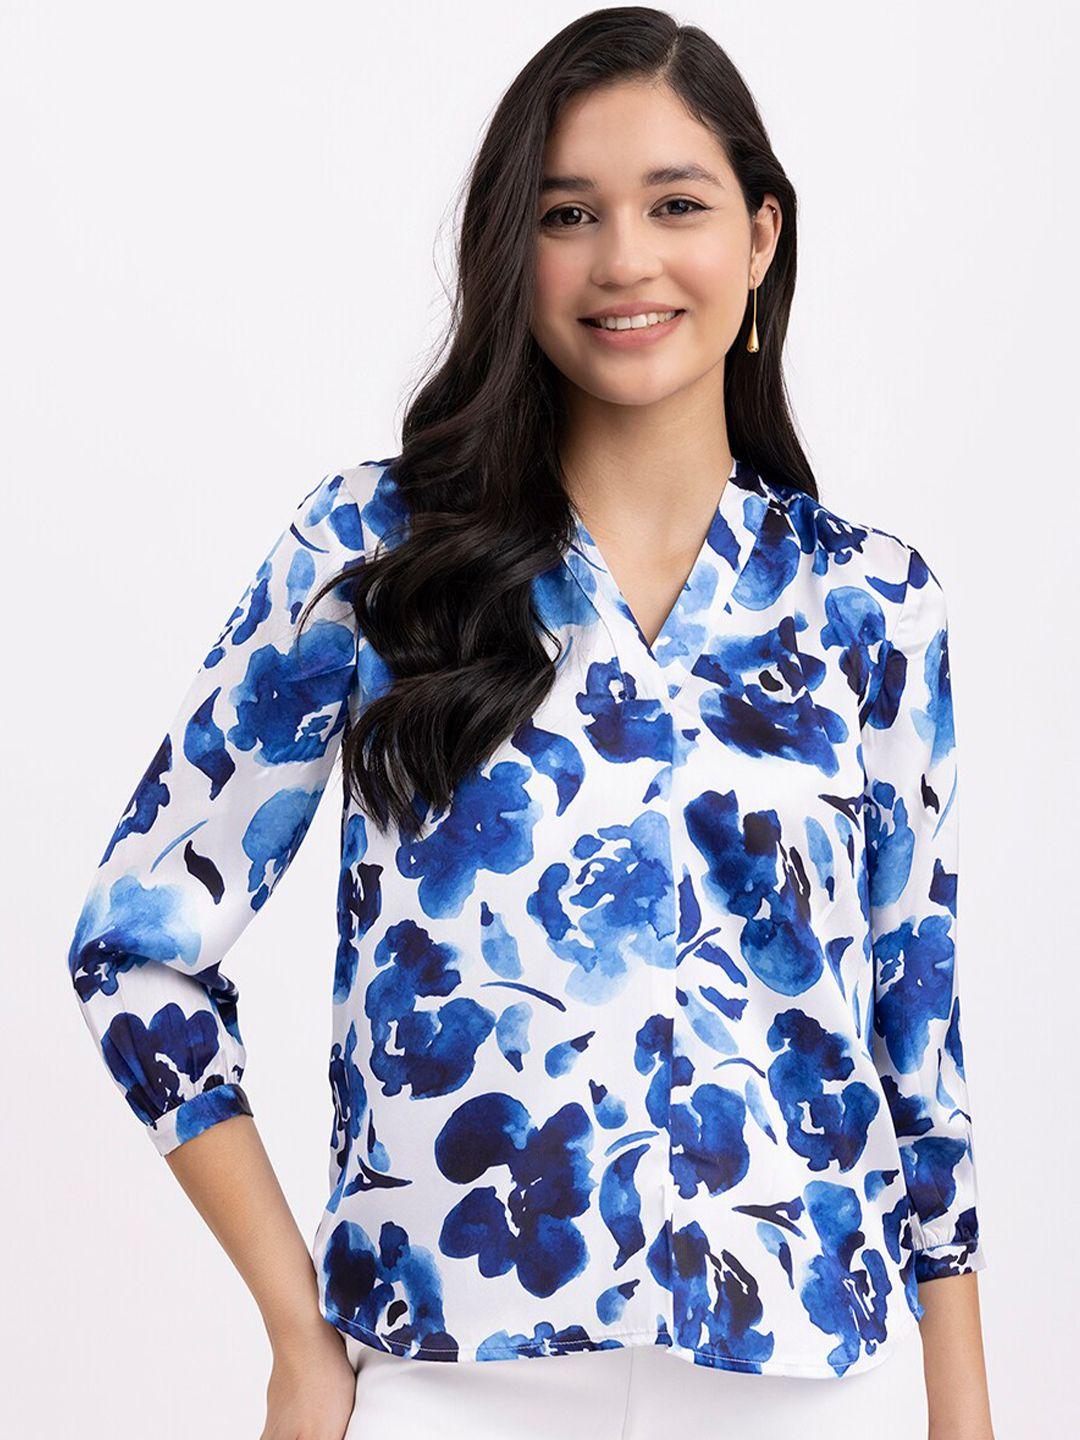 fablestreet floral printed v-neck satin shirt style top